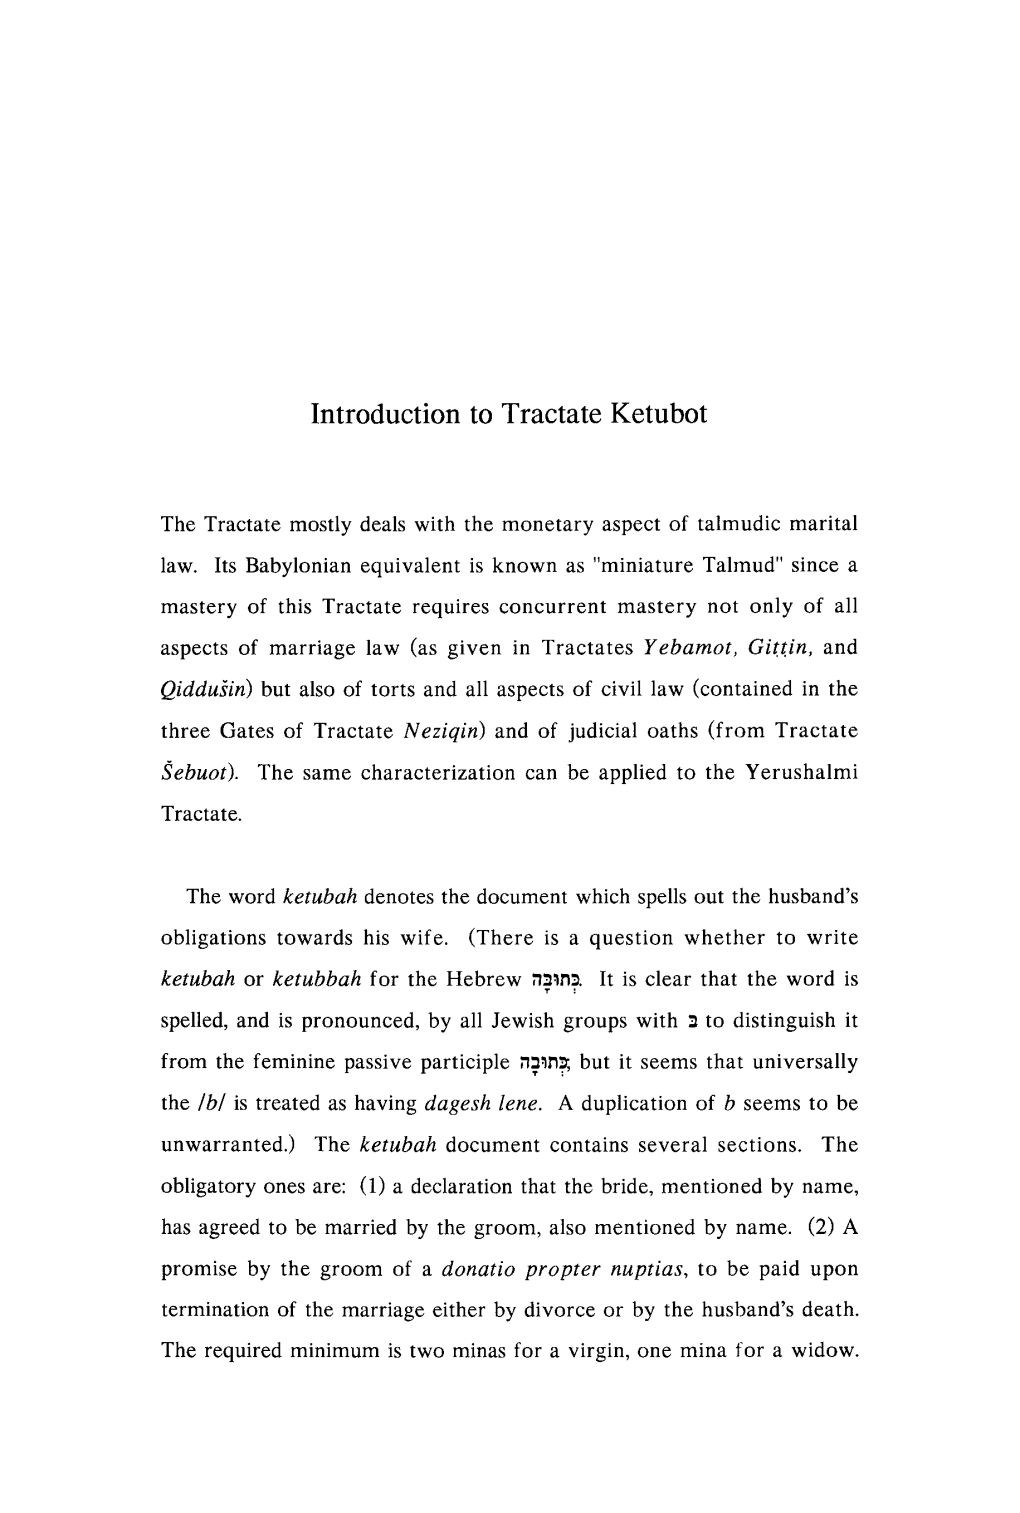 Introduction to Tractate Ketubot